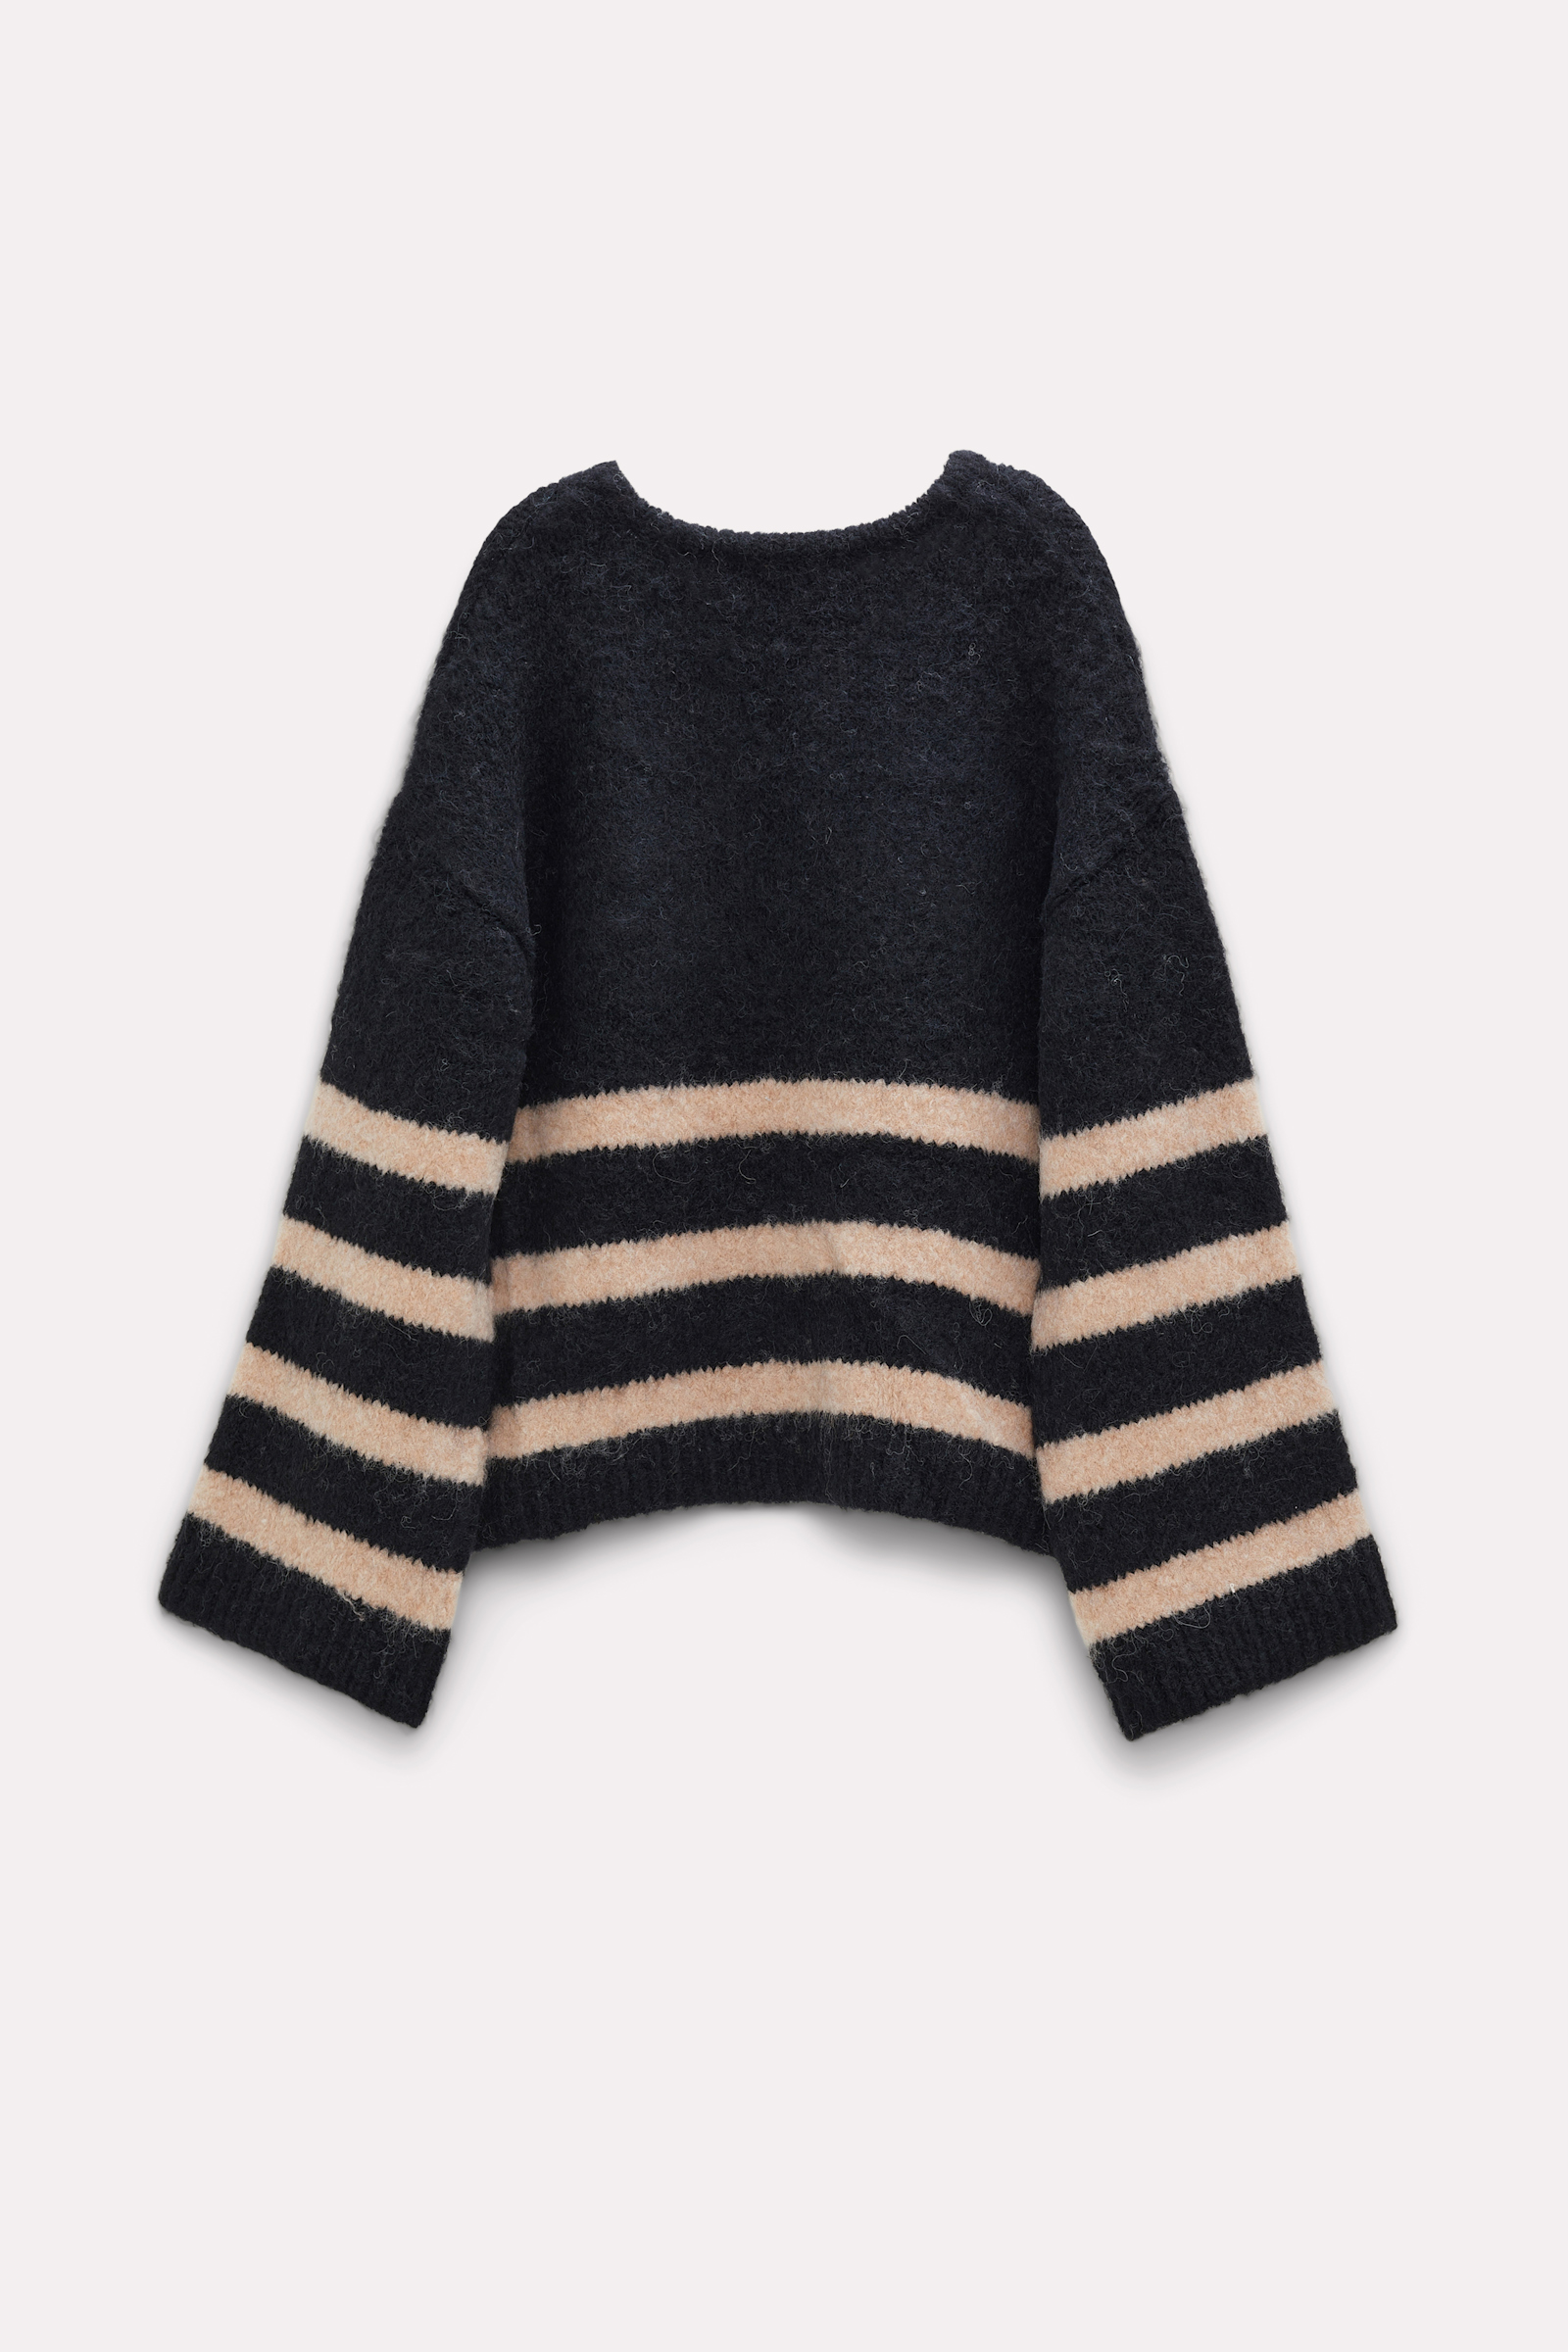 Dorothee Schumacher Striped sweater with lacing black cream mix